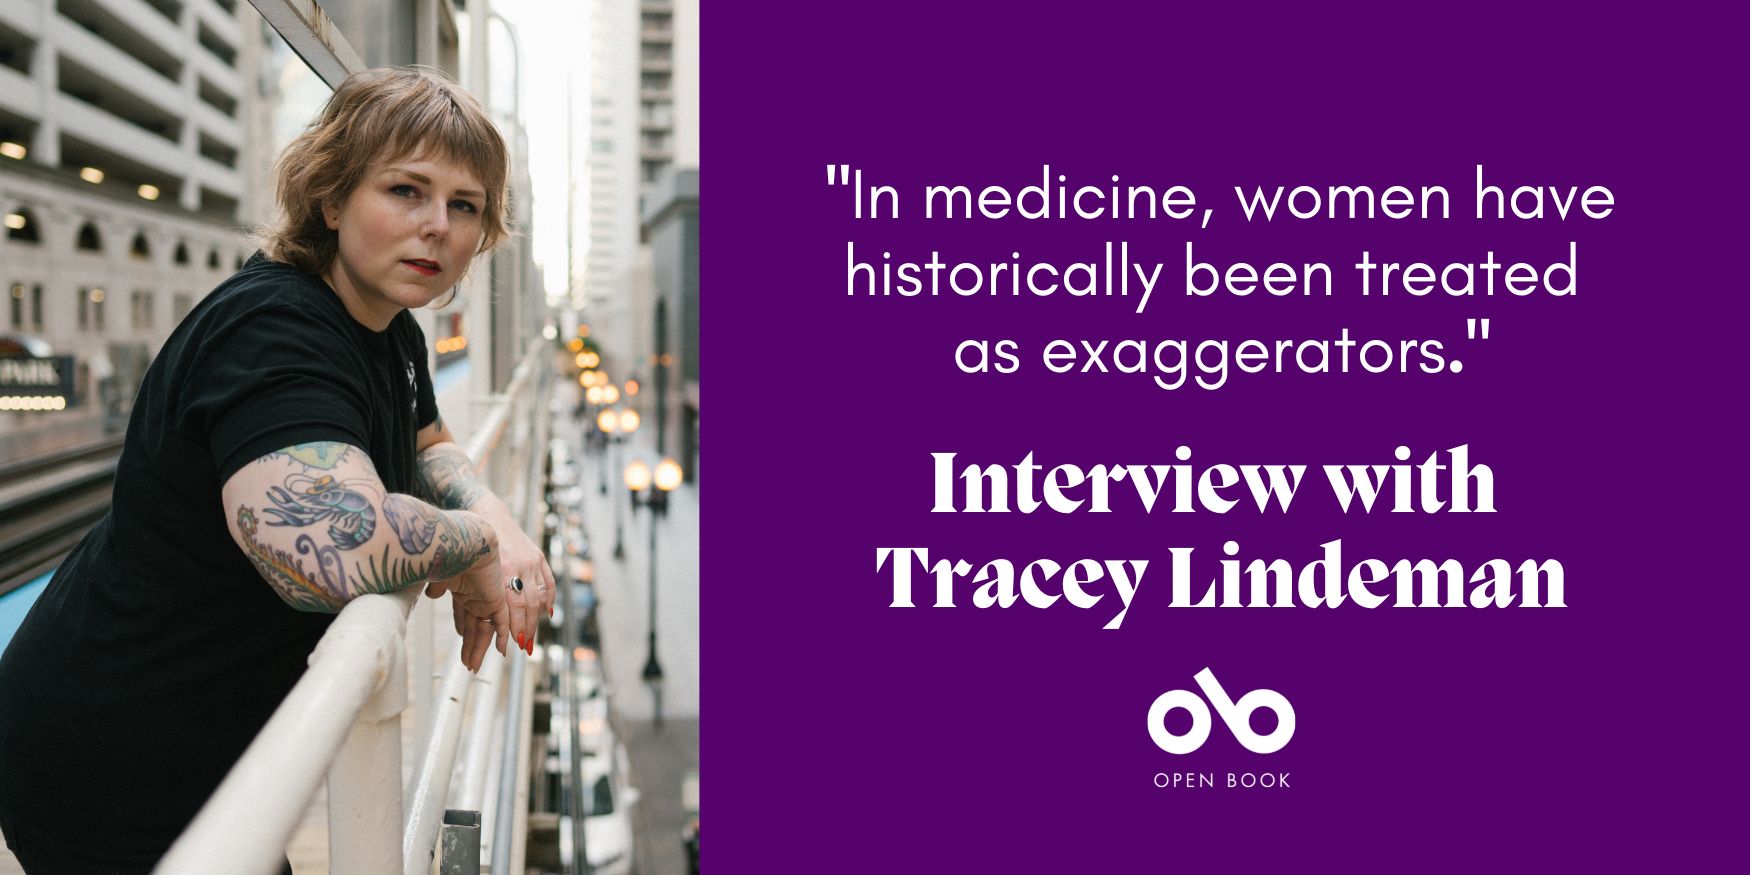 Photo of author Tracey Lindeman beside purple background reading "In medicine, women have historically been treated  as exaggerators. Interview with Tracey Lindeman". Open Book logo centred below text